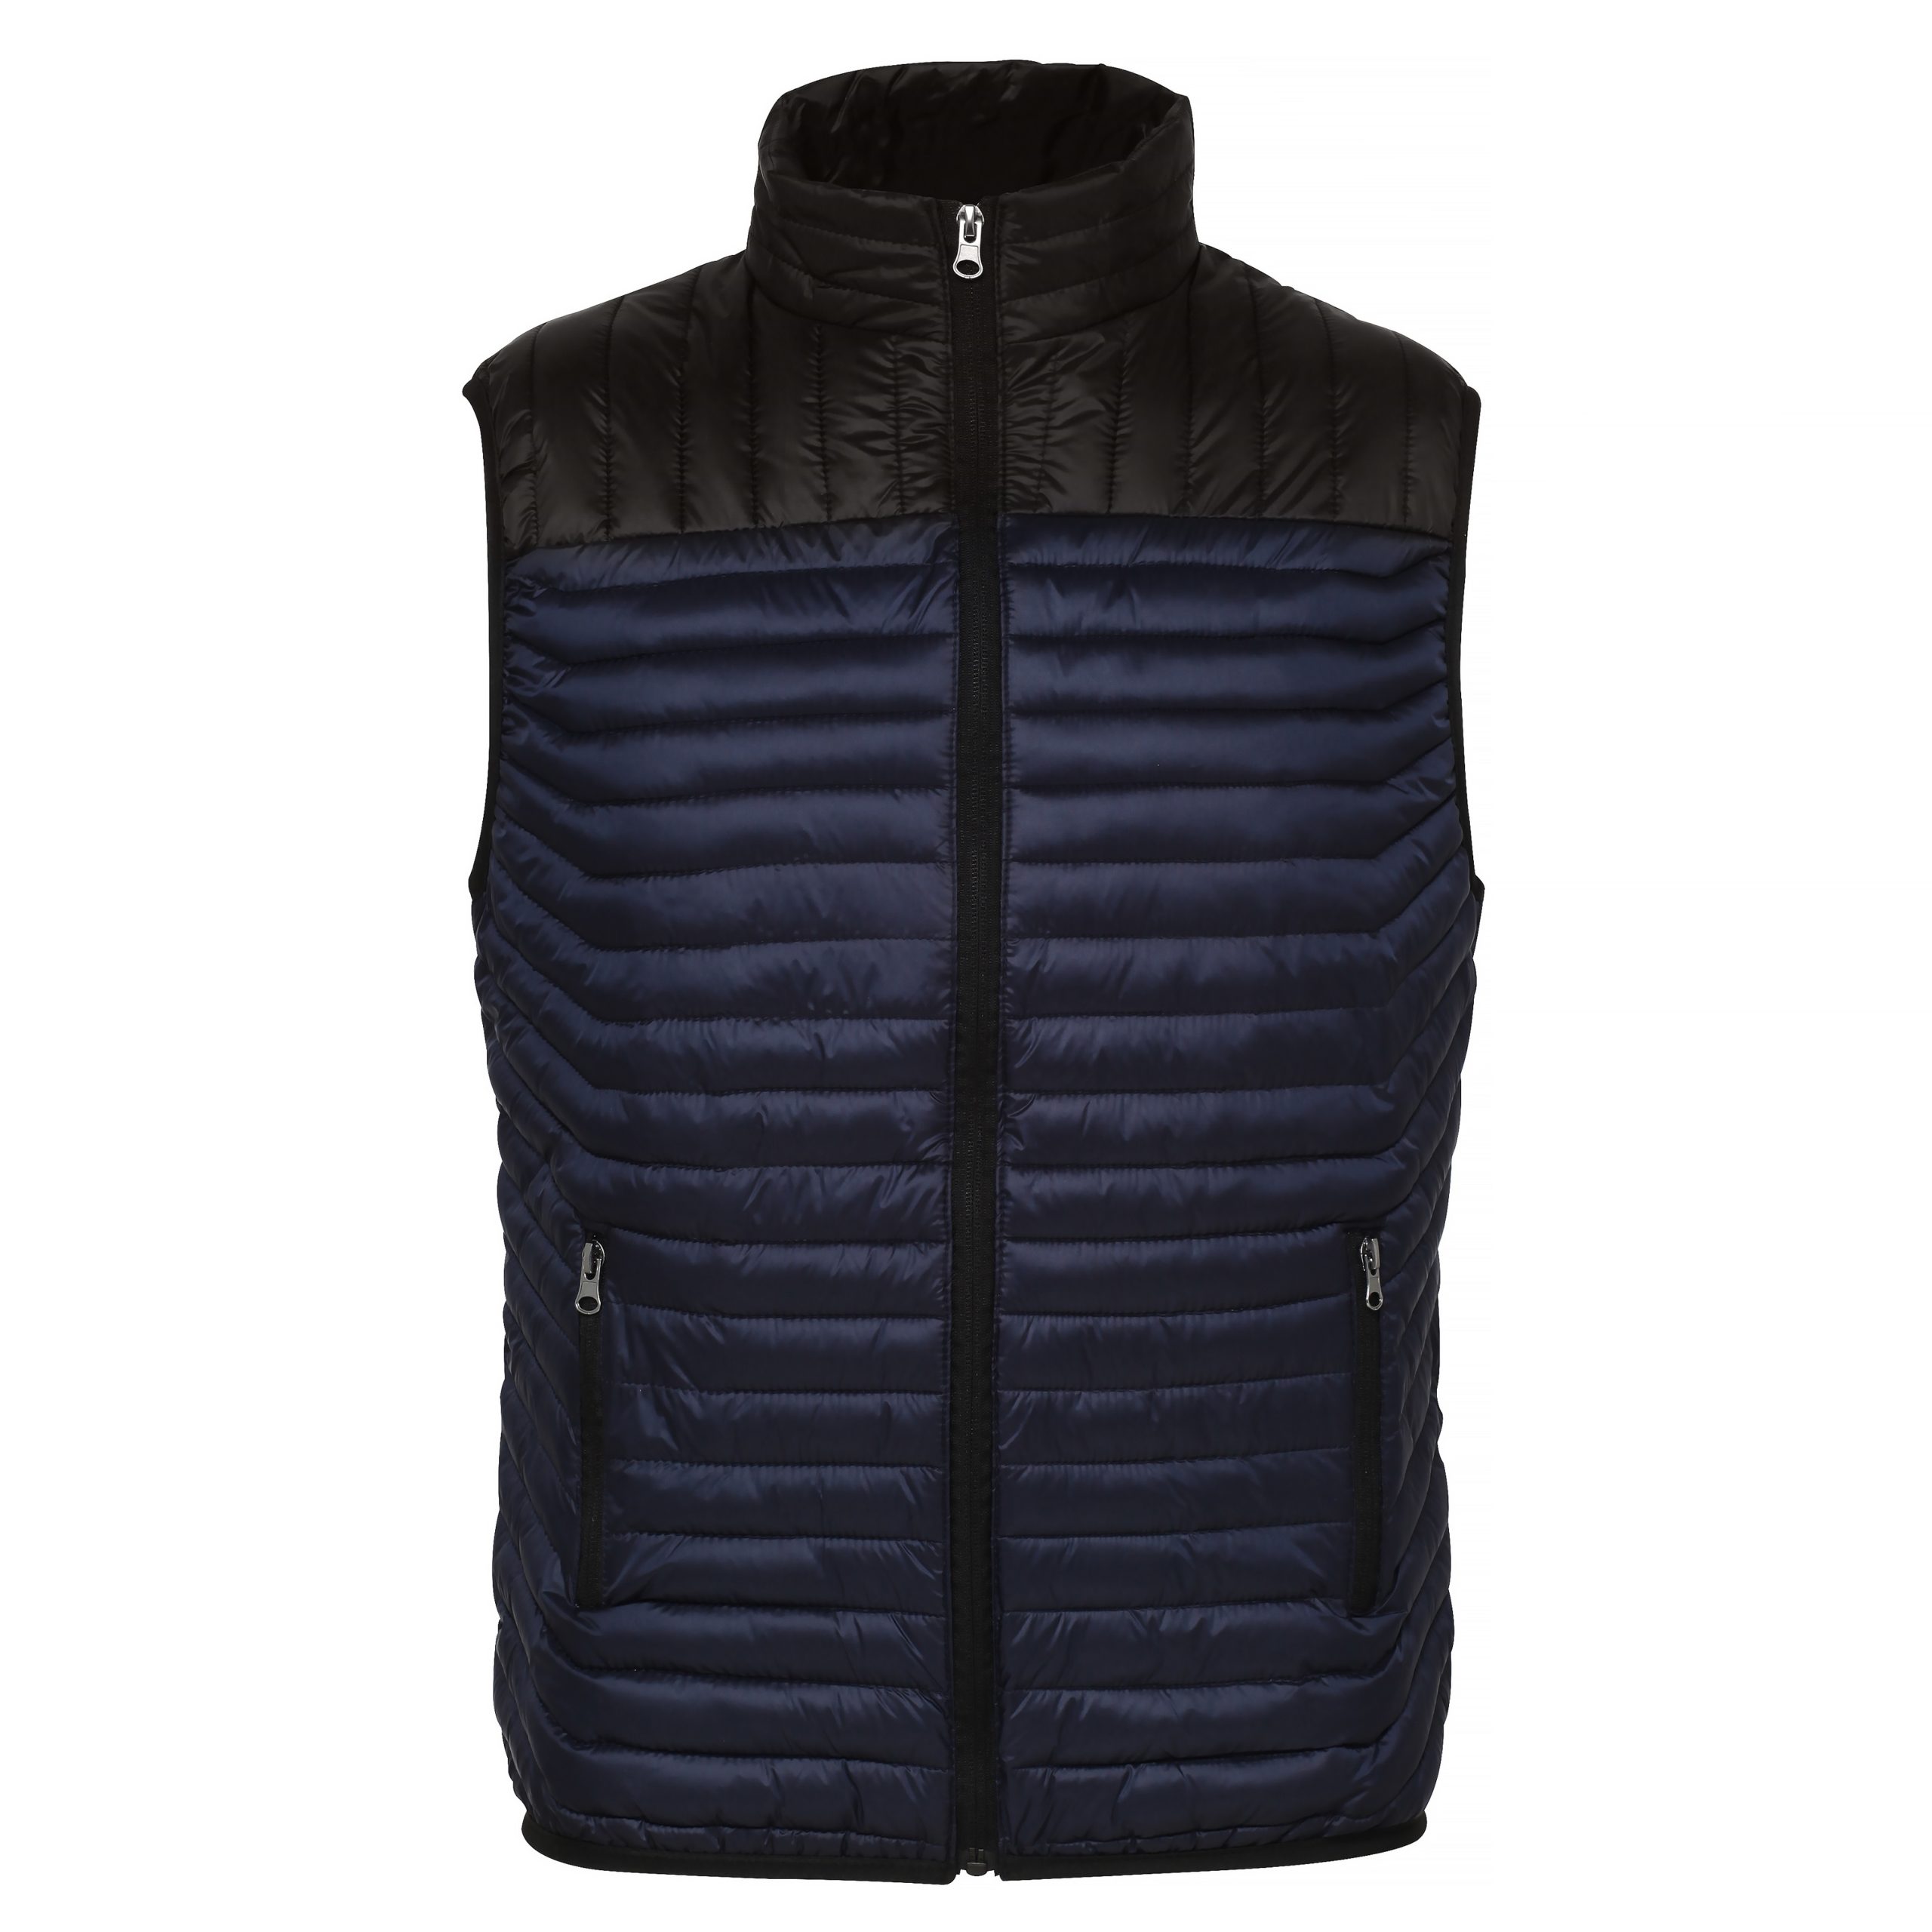 TS028 Domain two-tone gilet – GDB Manufacturing